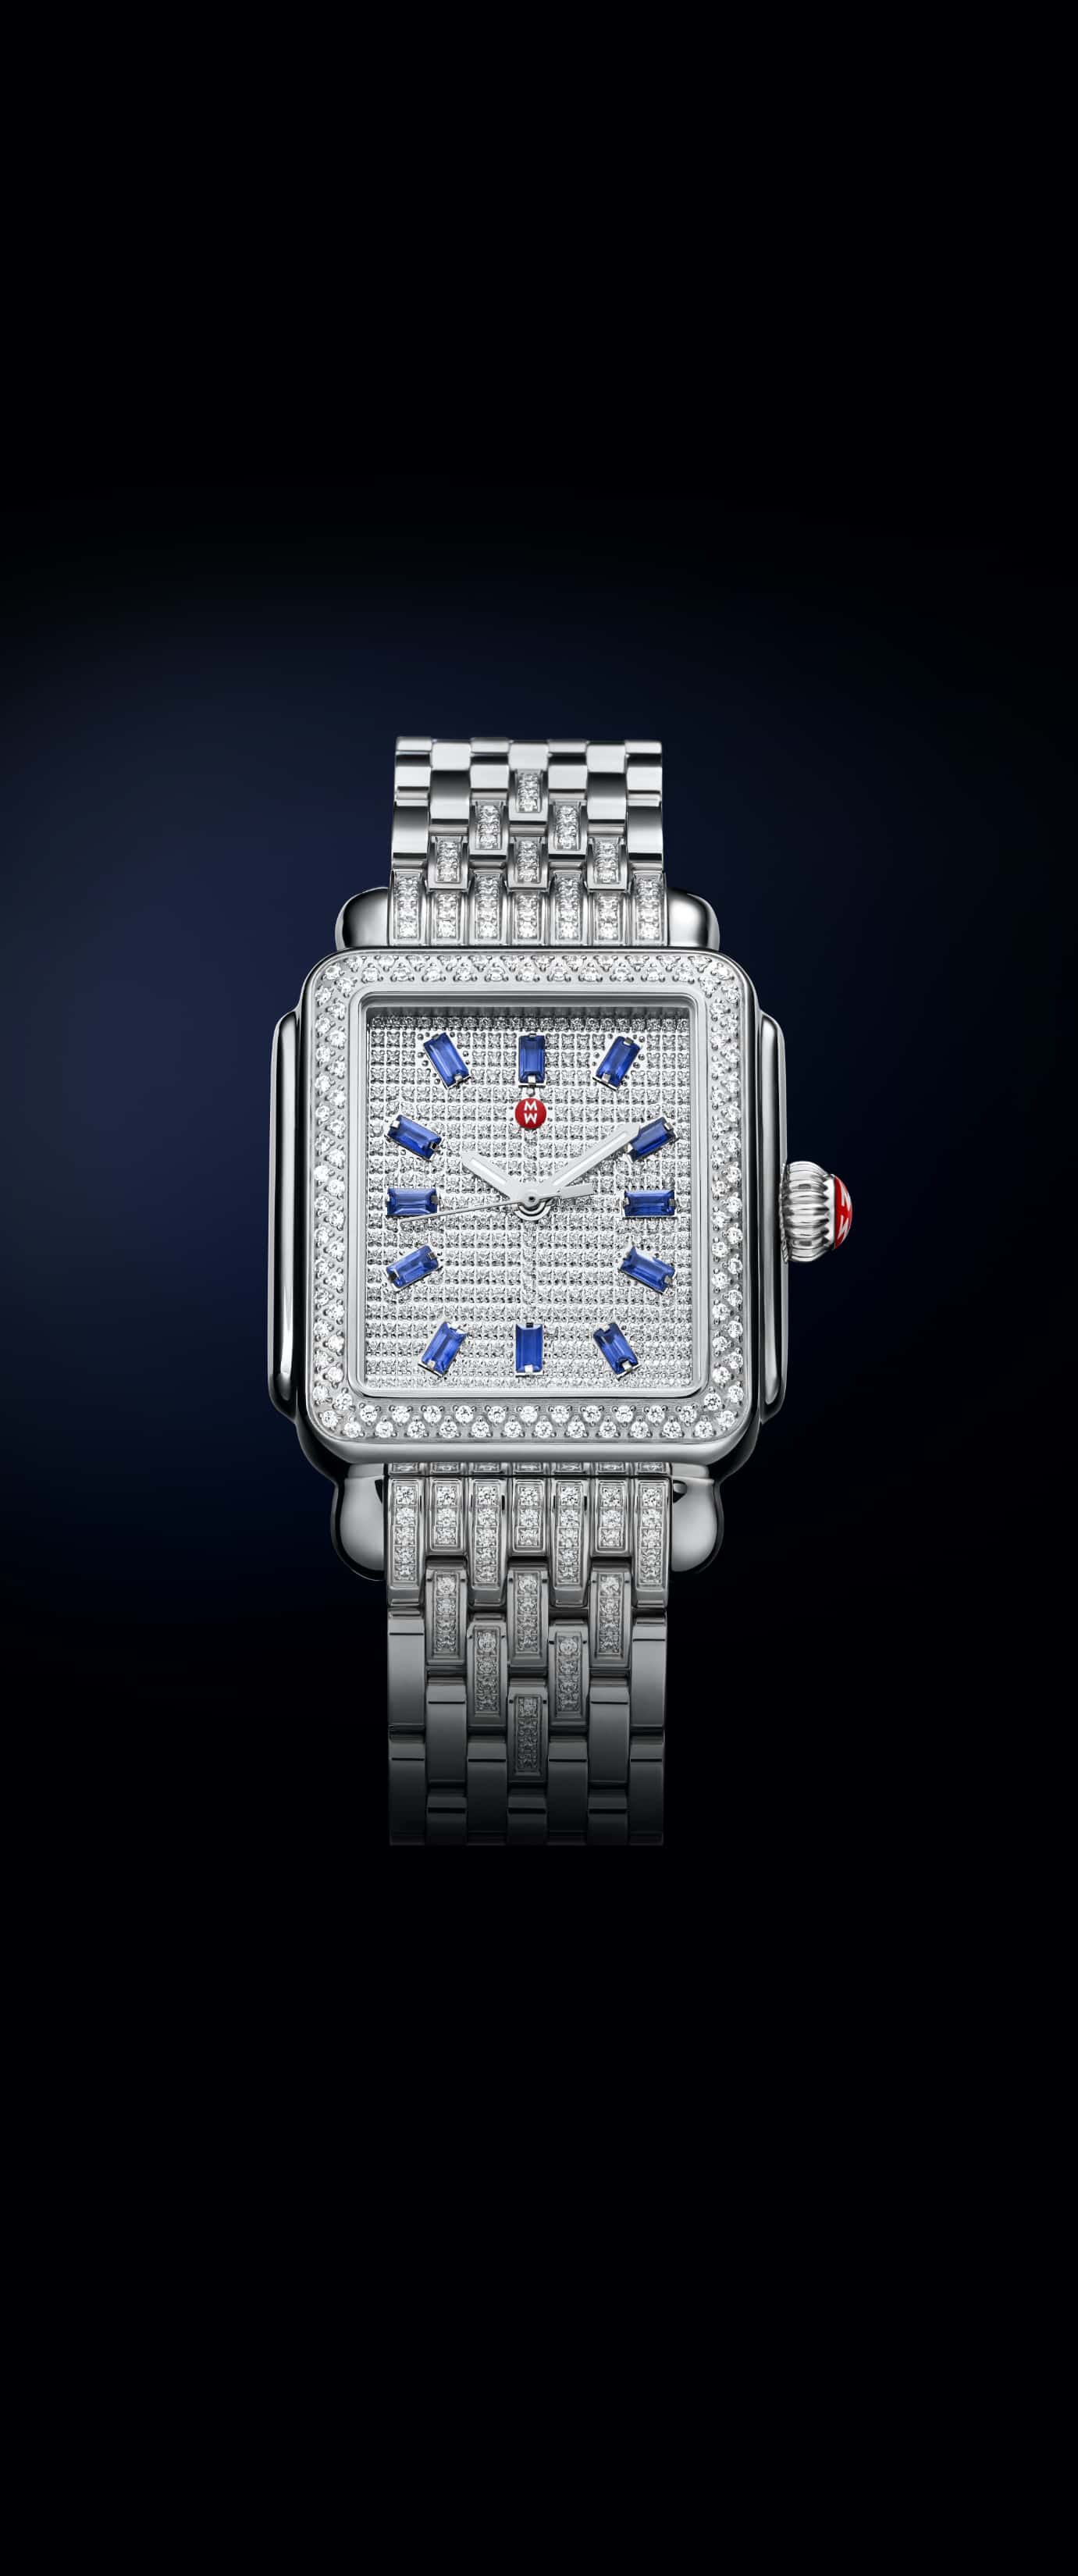 Limited Edition Deco Diamond Pavé Sapphire watch by MICHELE featuring diamonds and sapphires